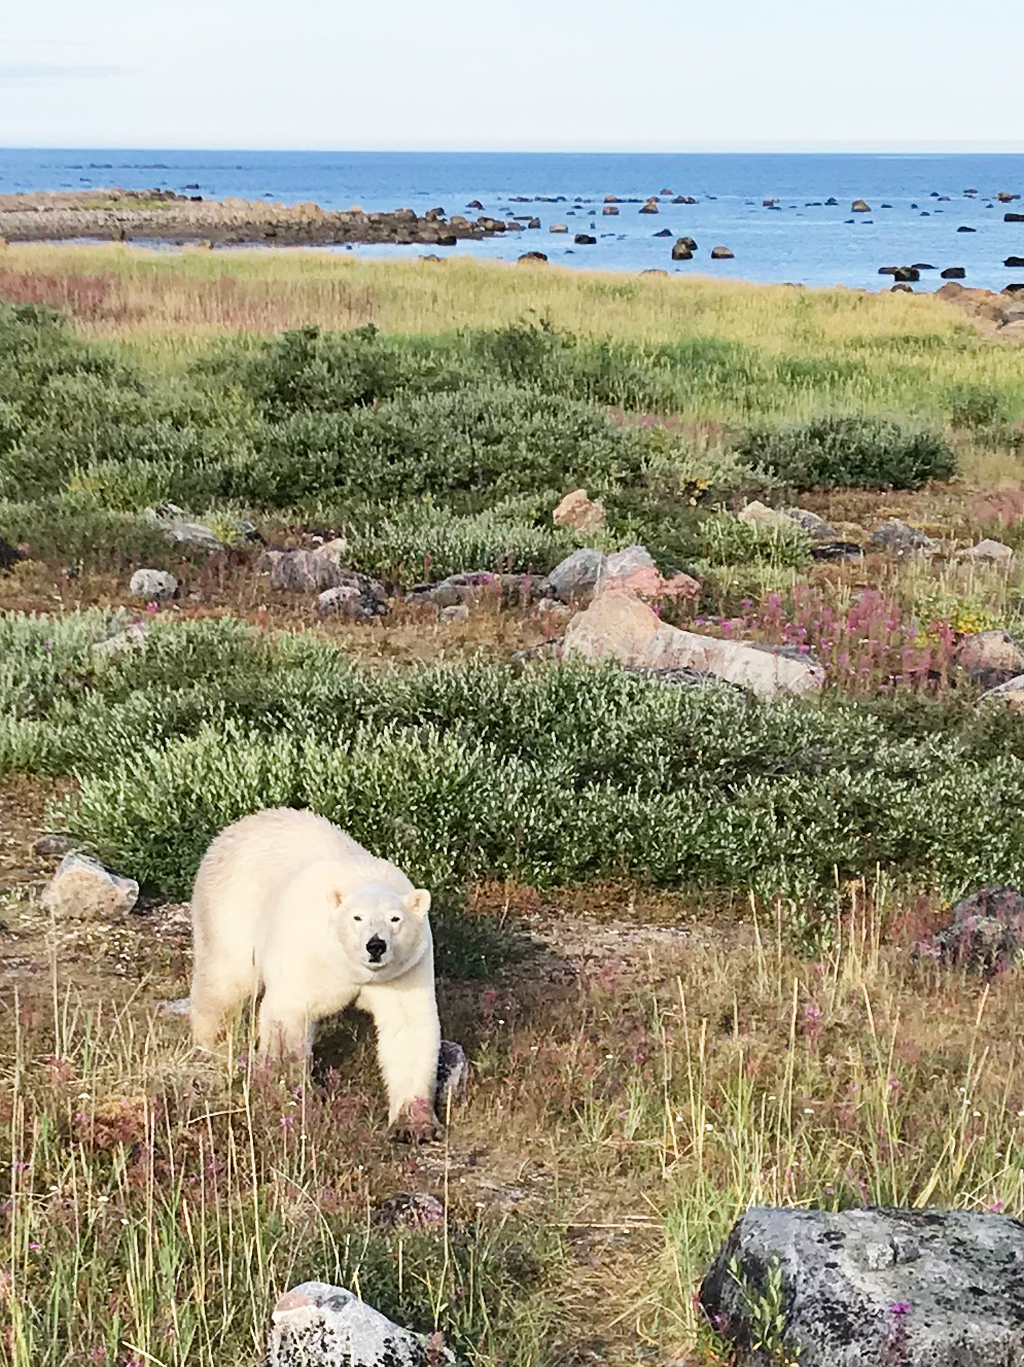 Bear. Tundra. Beach. Bay. Seal River Heritage Lodge. Photo courtesy of guest Ann Wiley.